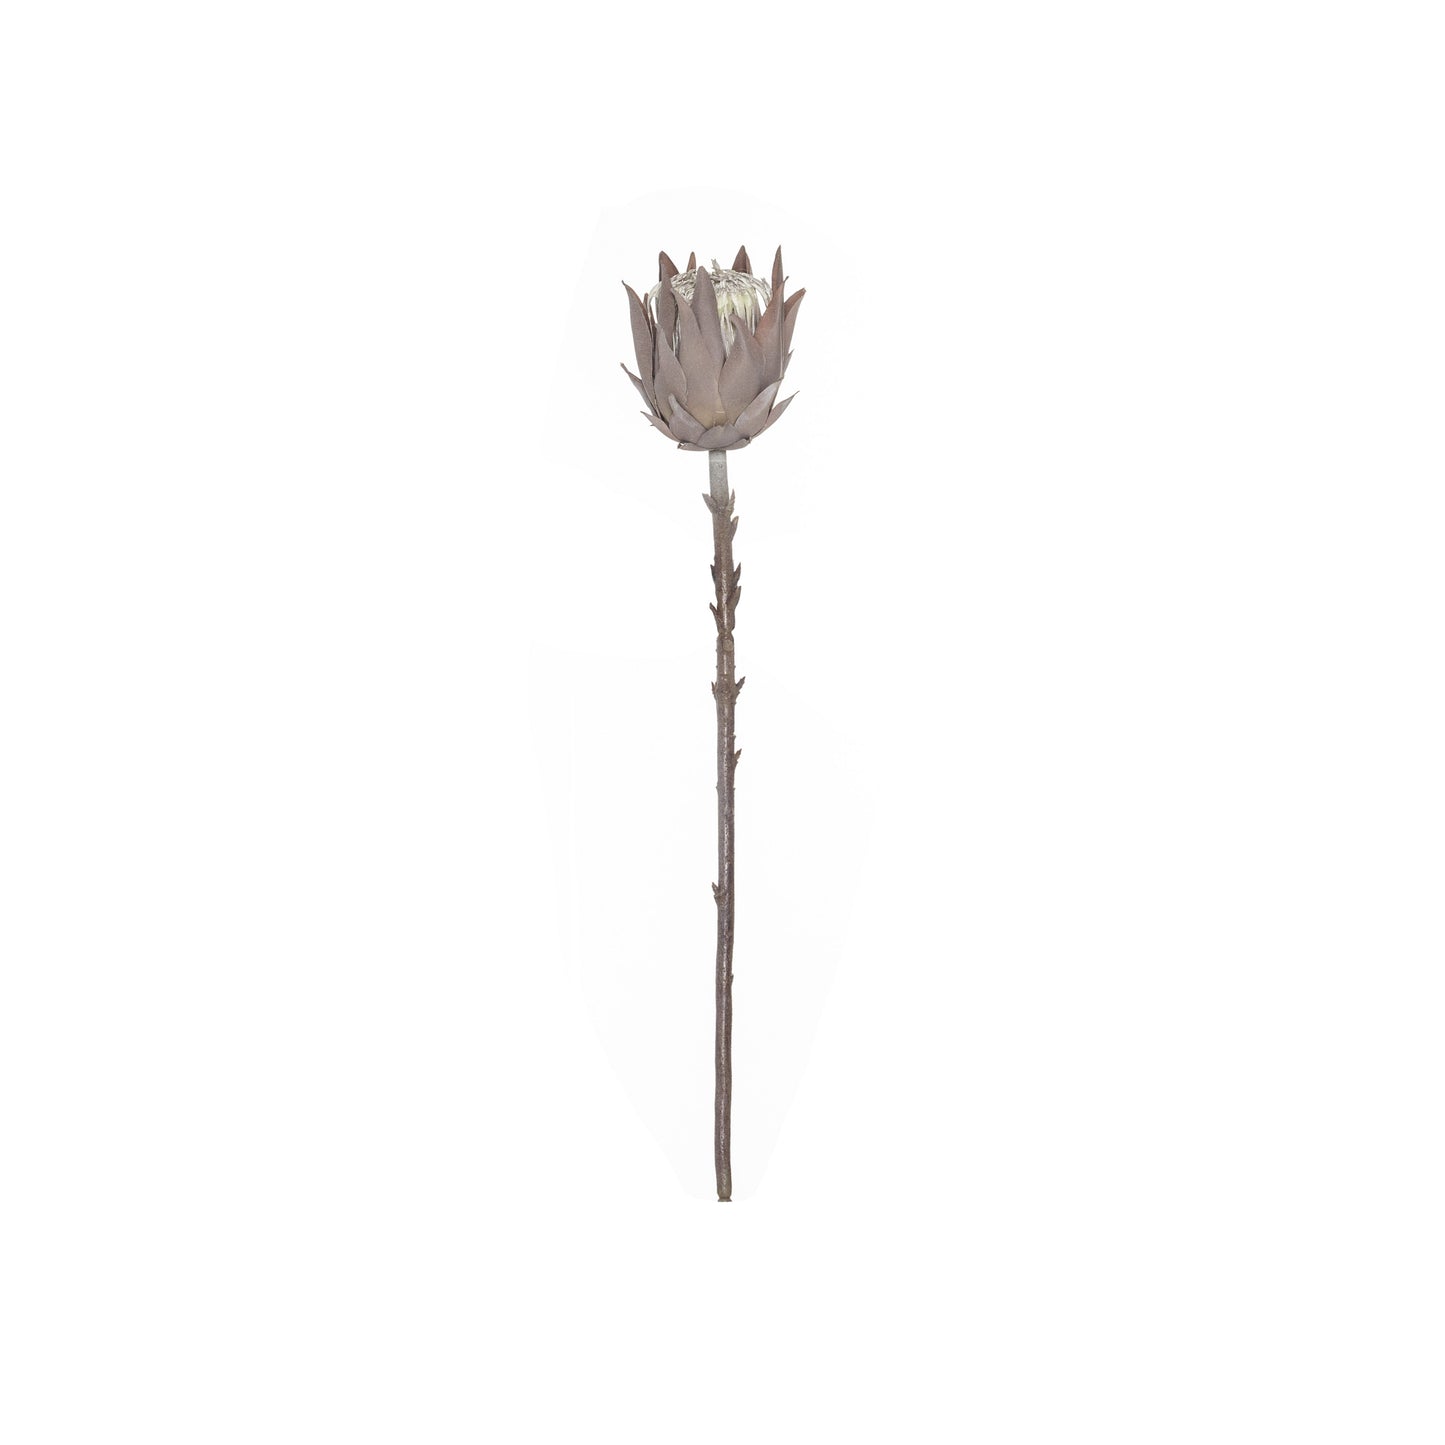 Rogue Dried Look Protea Stem 51cm Brown